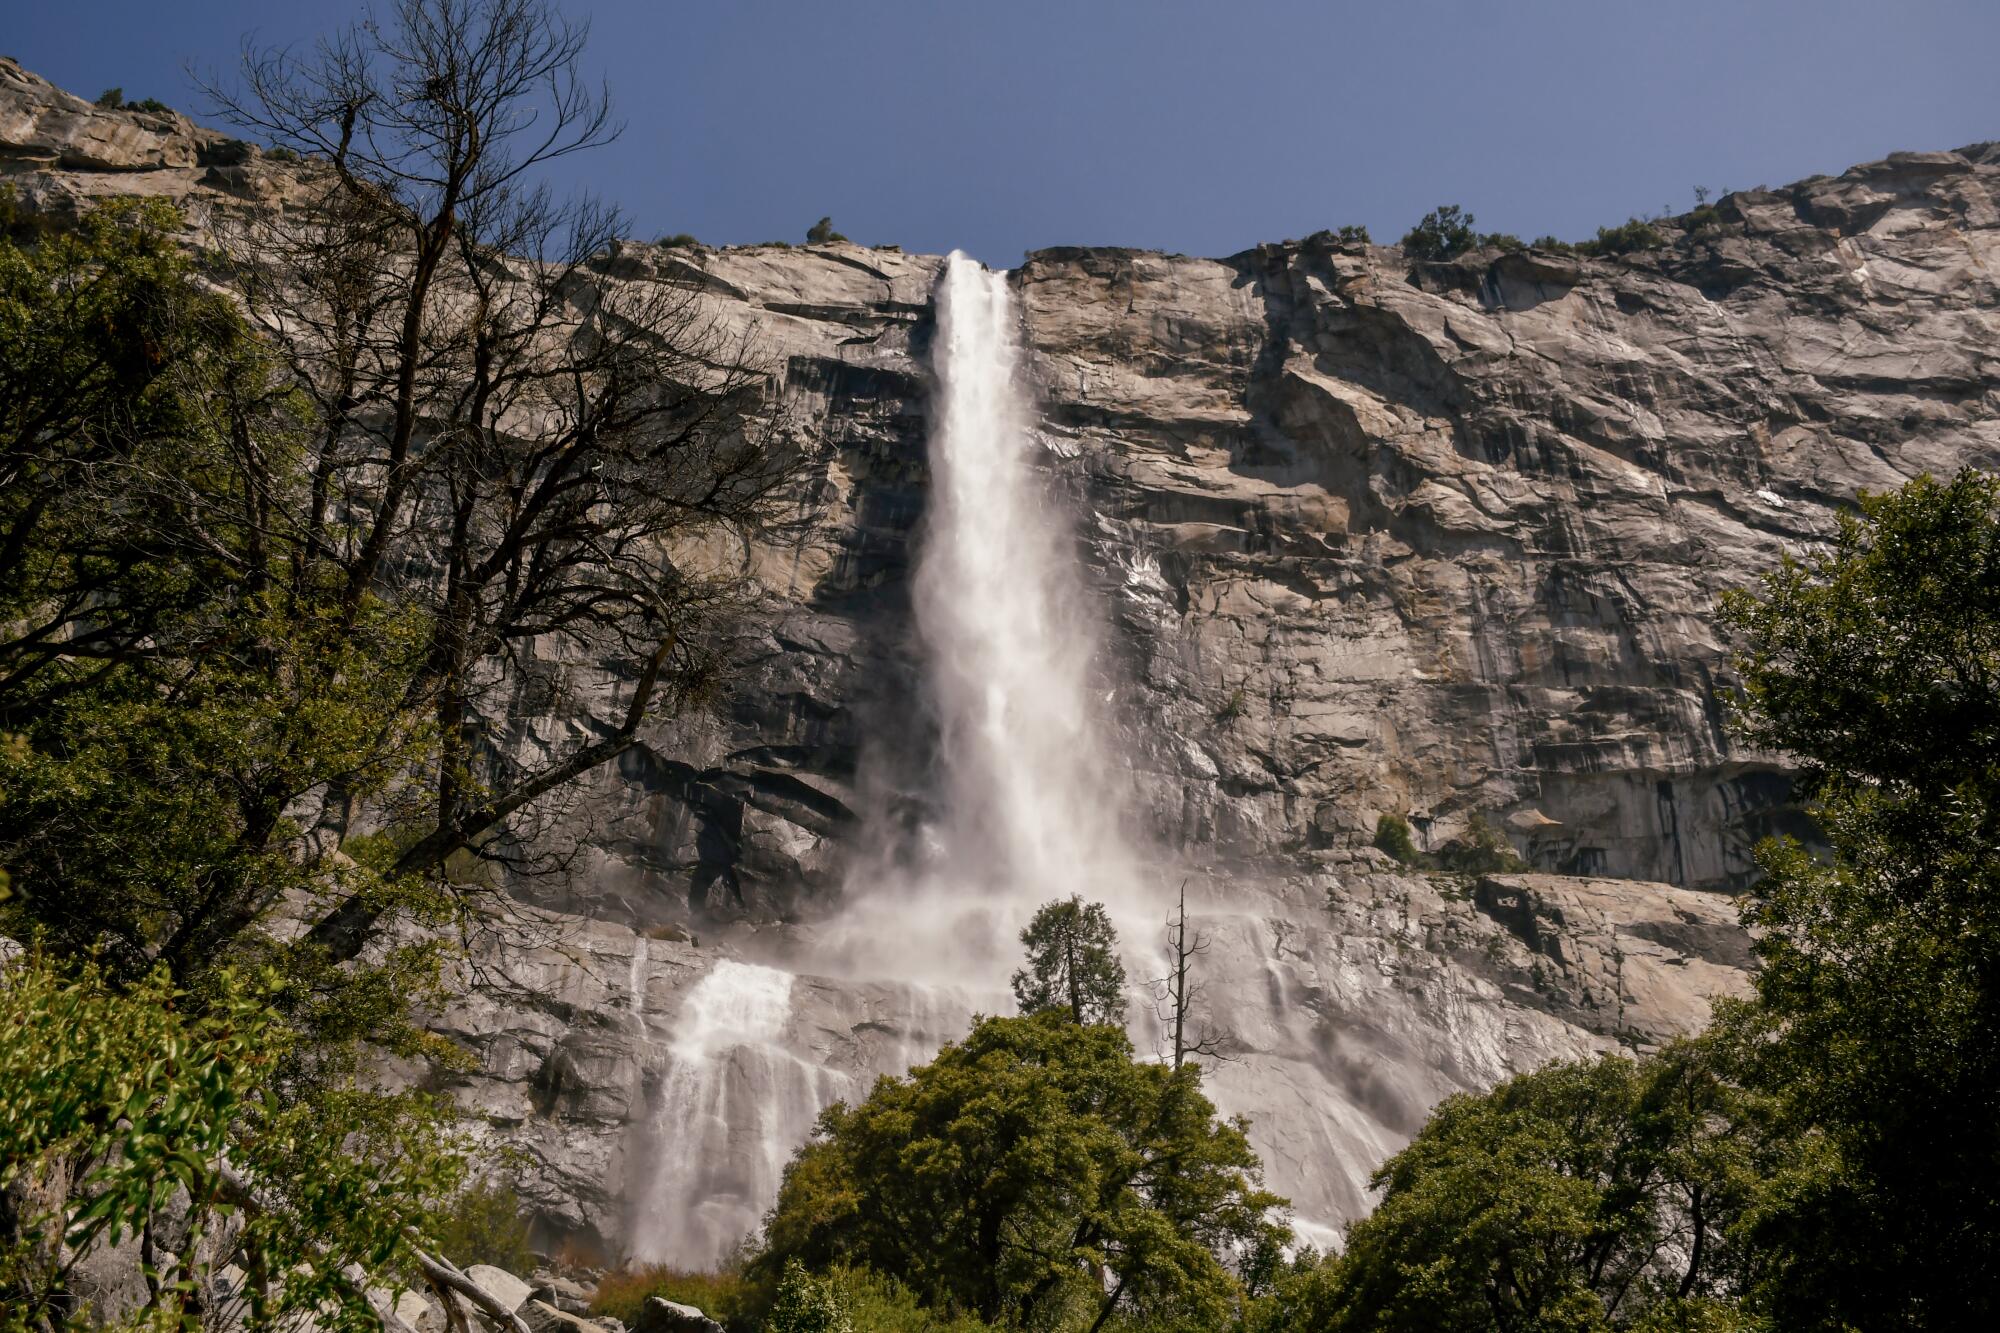 One of the Hetch Hetchy Valley's highlights is seasonal Tueeulala Falls.